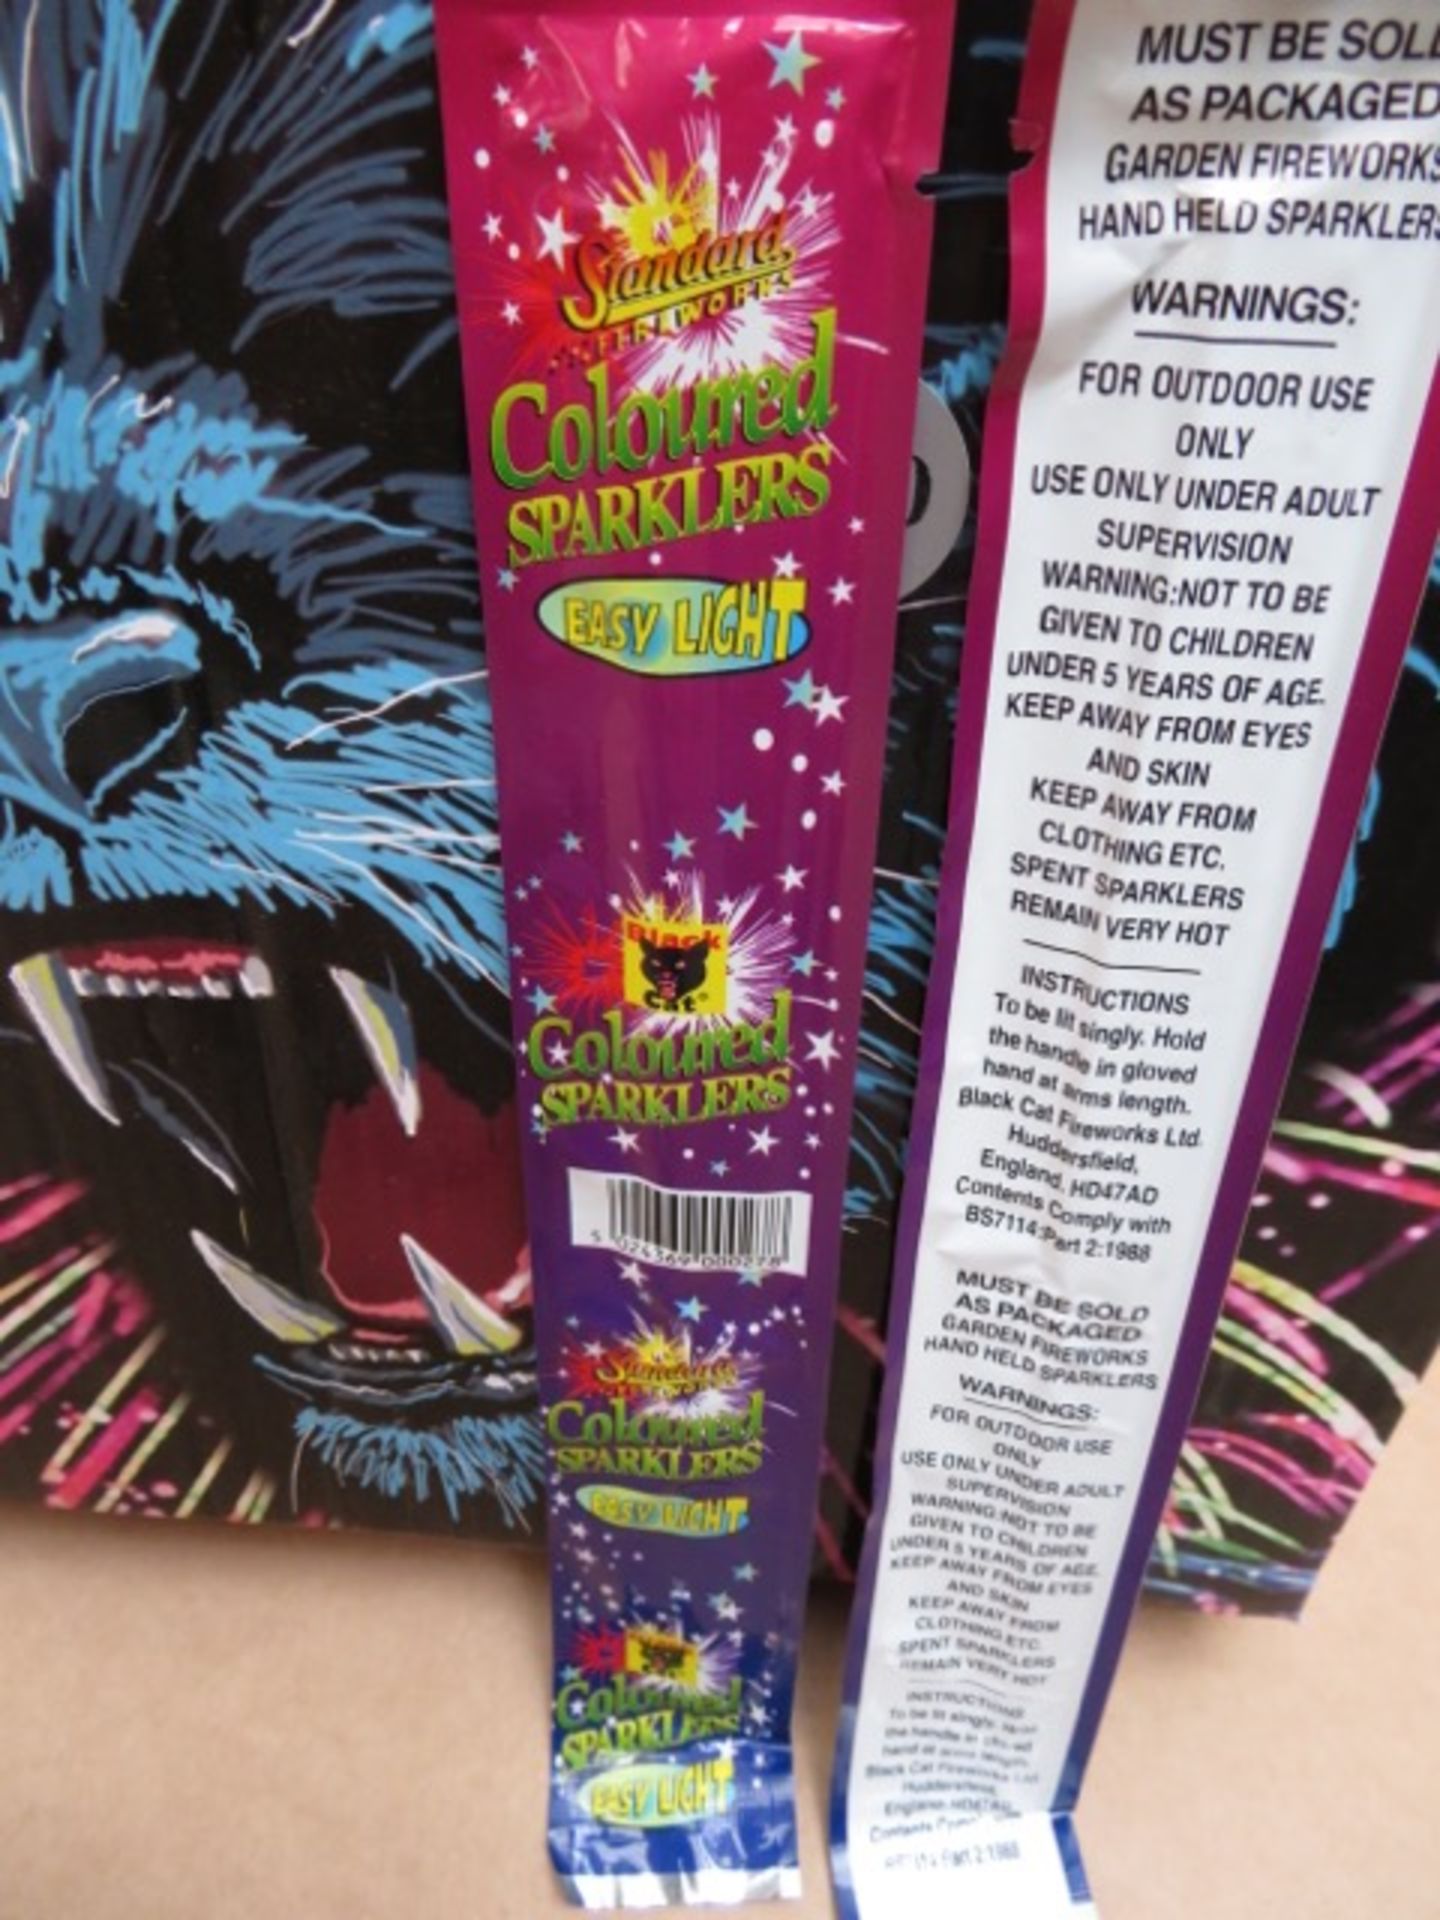 144 x Packs of 5 Black Cat Colored 10 Inch Easy Light Sparklers. RRP £1 per pack, giving this lot - Image 4 of 4